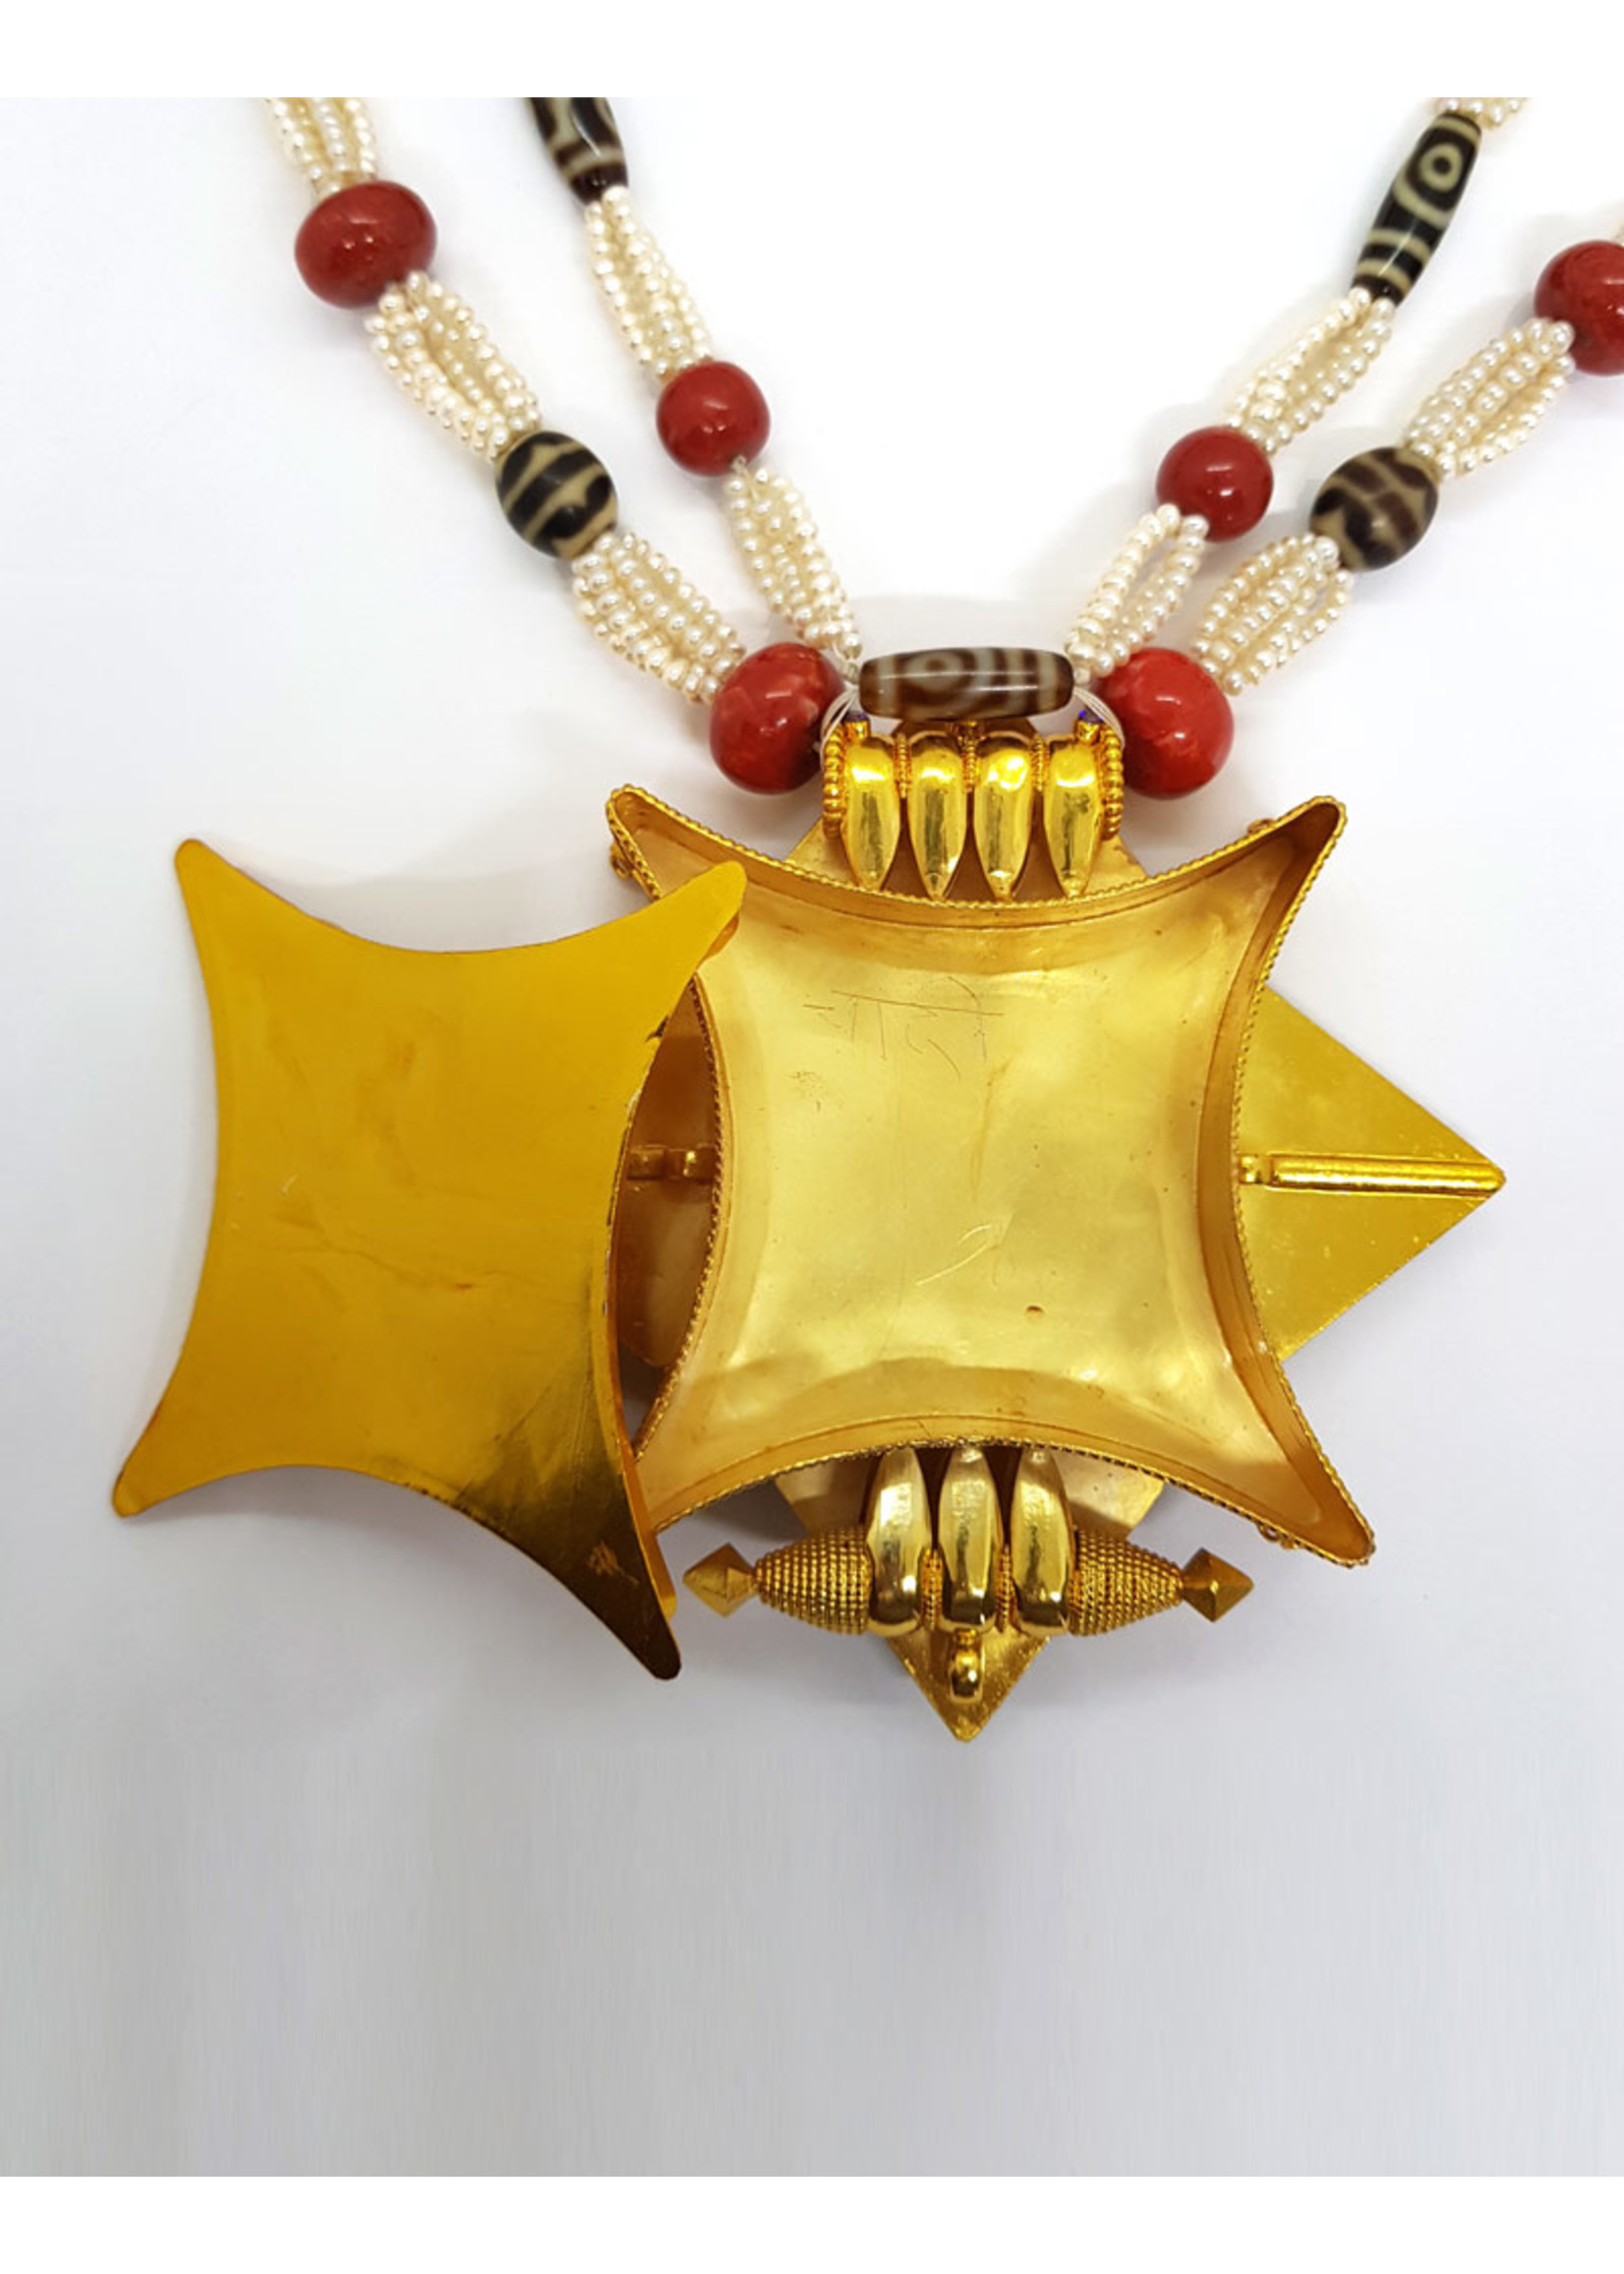 Tibetan Jewellery Necklace Gau with Dzis, Corals and Pearls